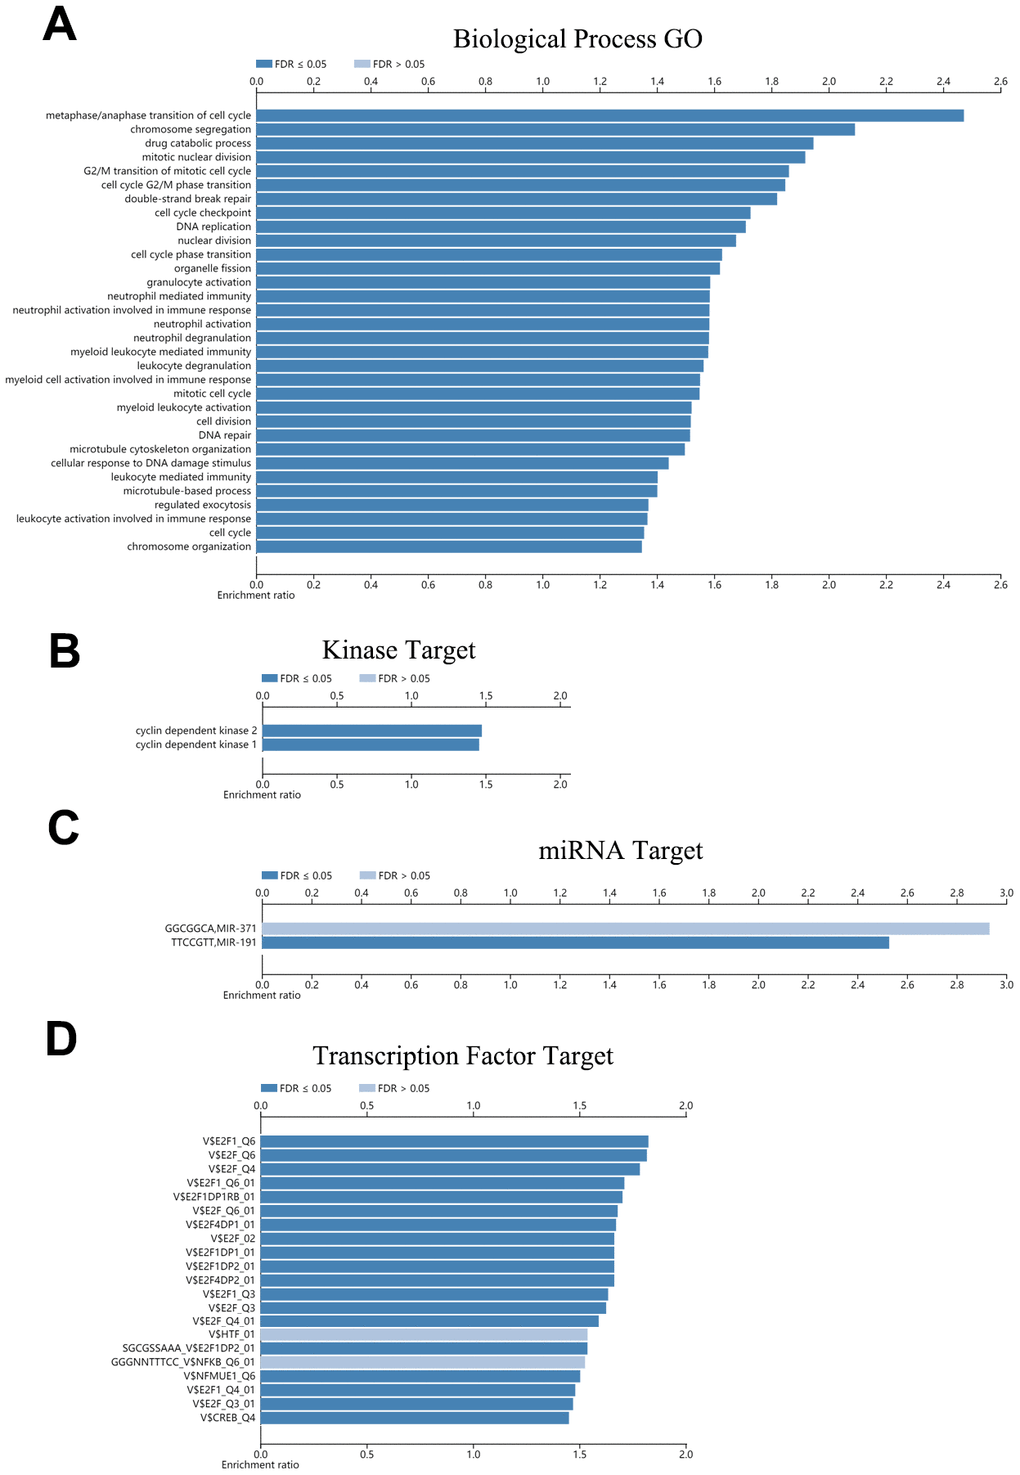 Function enrichment, kinases targets, miRNA targets and transcription factor targets of CDH23 (LinkedOmics). (A) Biological process enrichment of CDH23 in DLBCL. (B). Kinase targets of CDH23 in DLBCL. (C) MiRNA target of CDH23. (D) Transcription factor targets of CDH23.